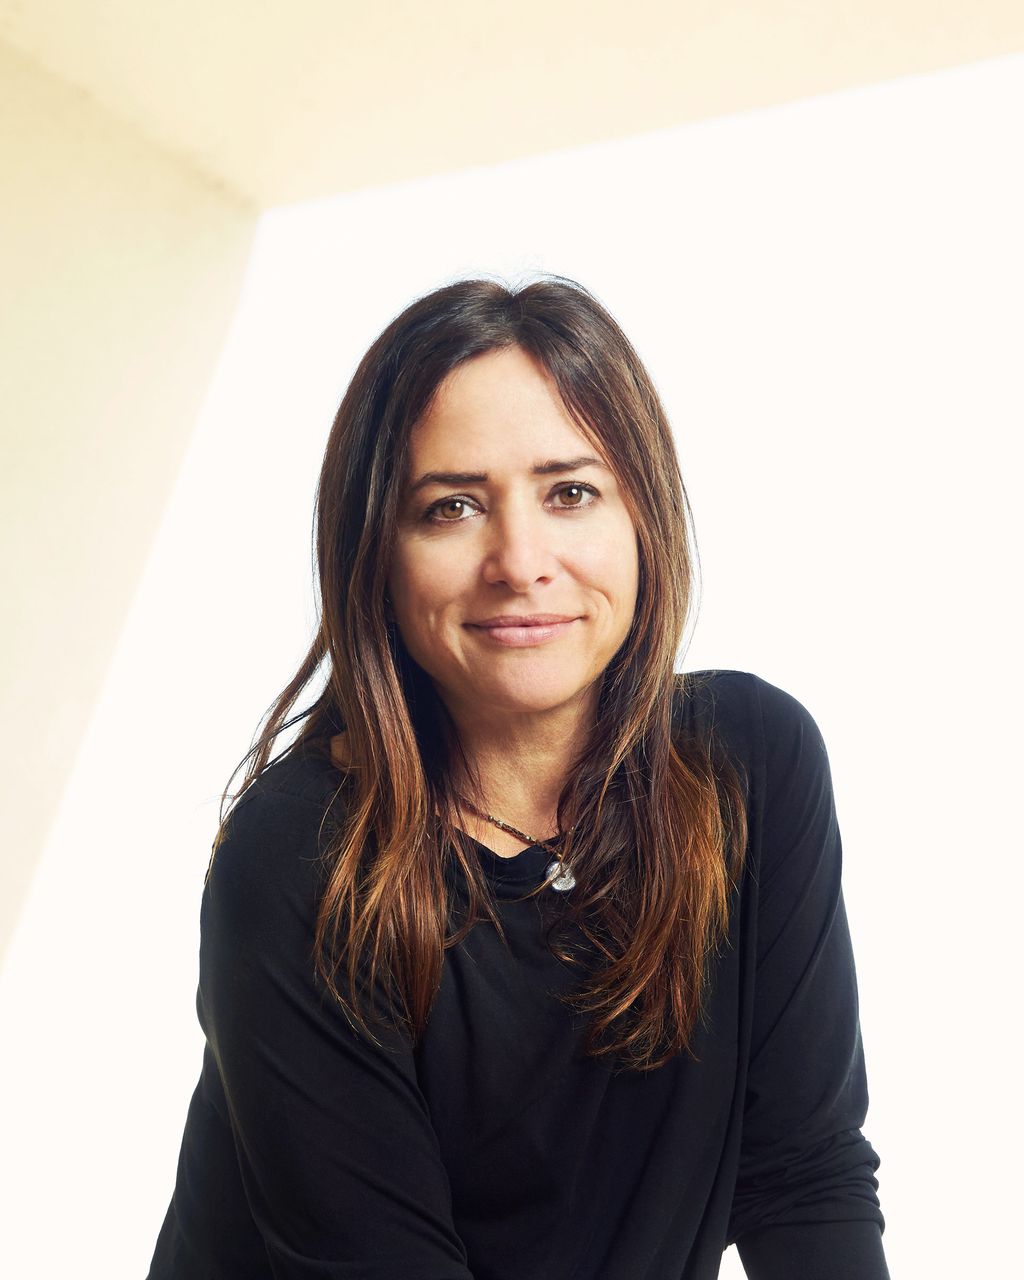 Pamela Adlon Cant Believe She Has Her Own Show photo pic